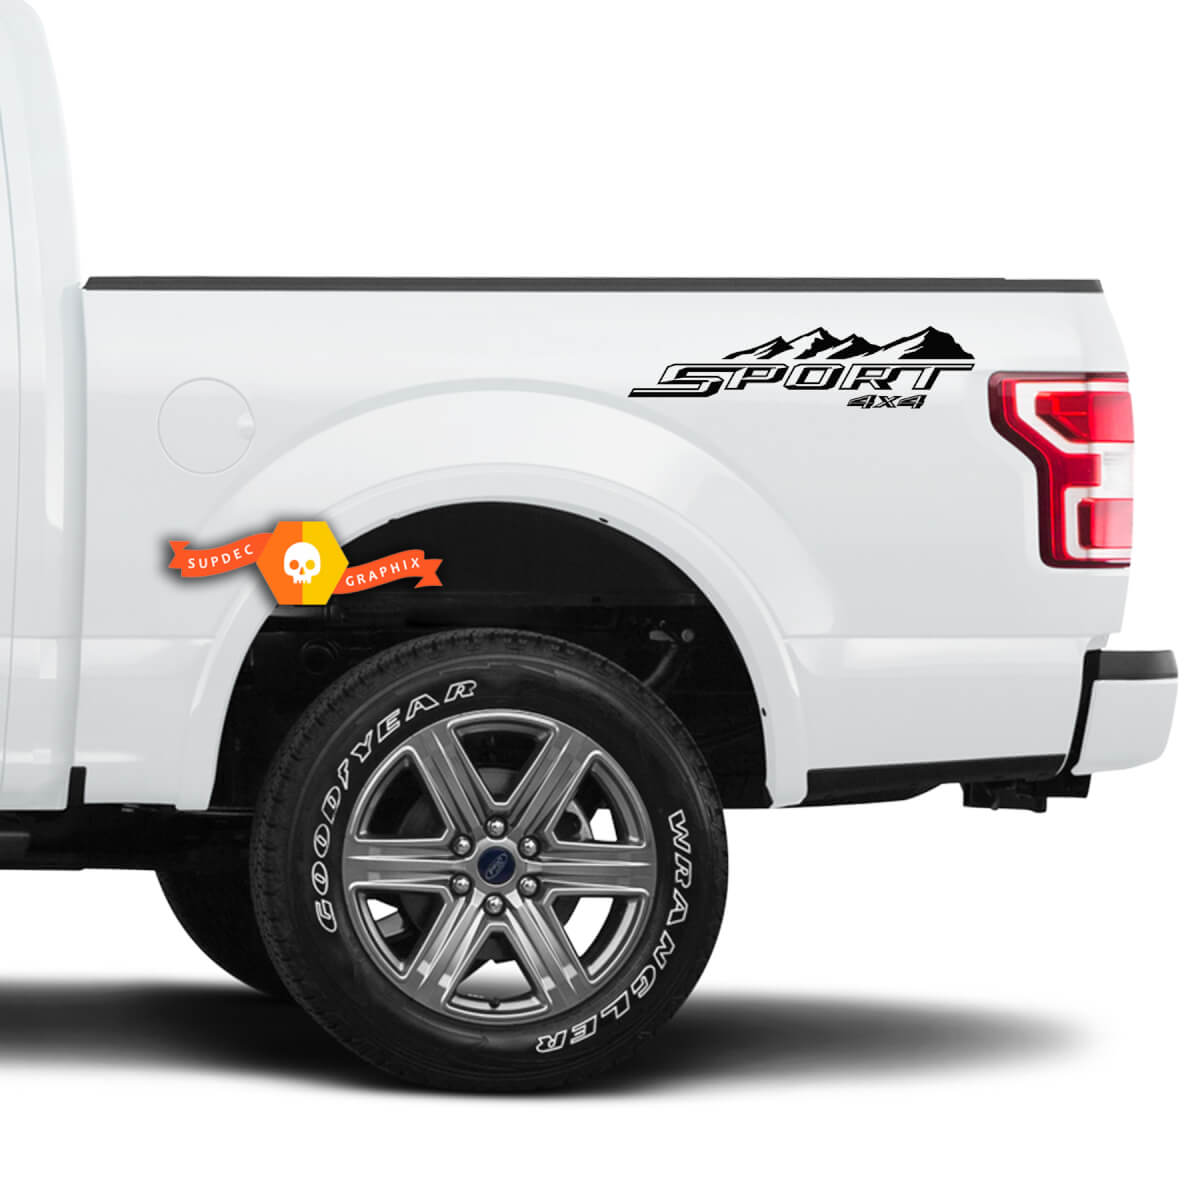 Pair Sport 4X4 Mountain Decals For Ford F150 F250 F350 Super Duty Truck Sticker Decal Vinyl
